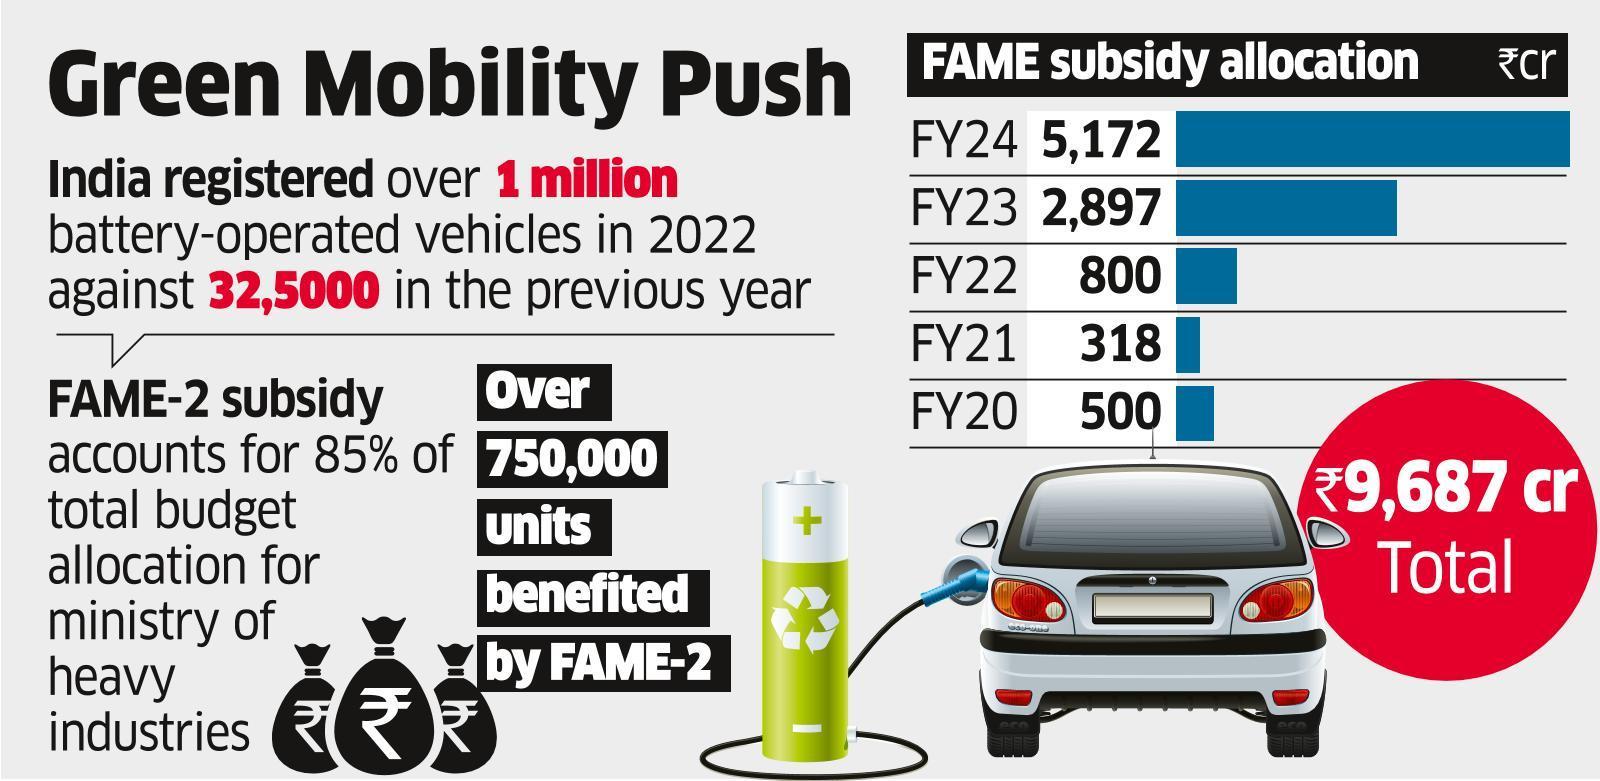 govt-nearly-doubles-allocation-under-fame-2-subsidy-scheme-the